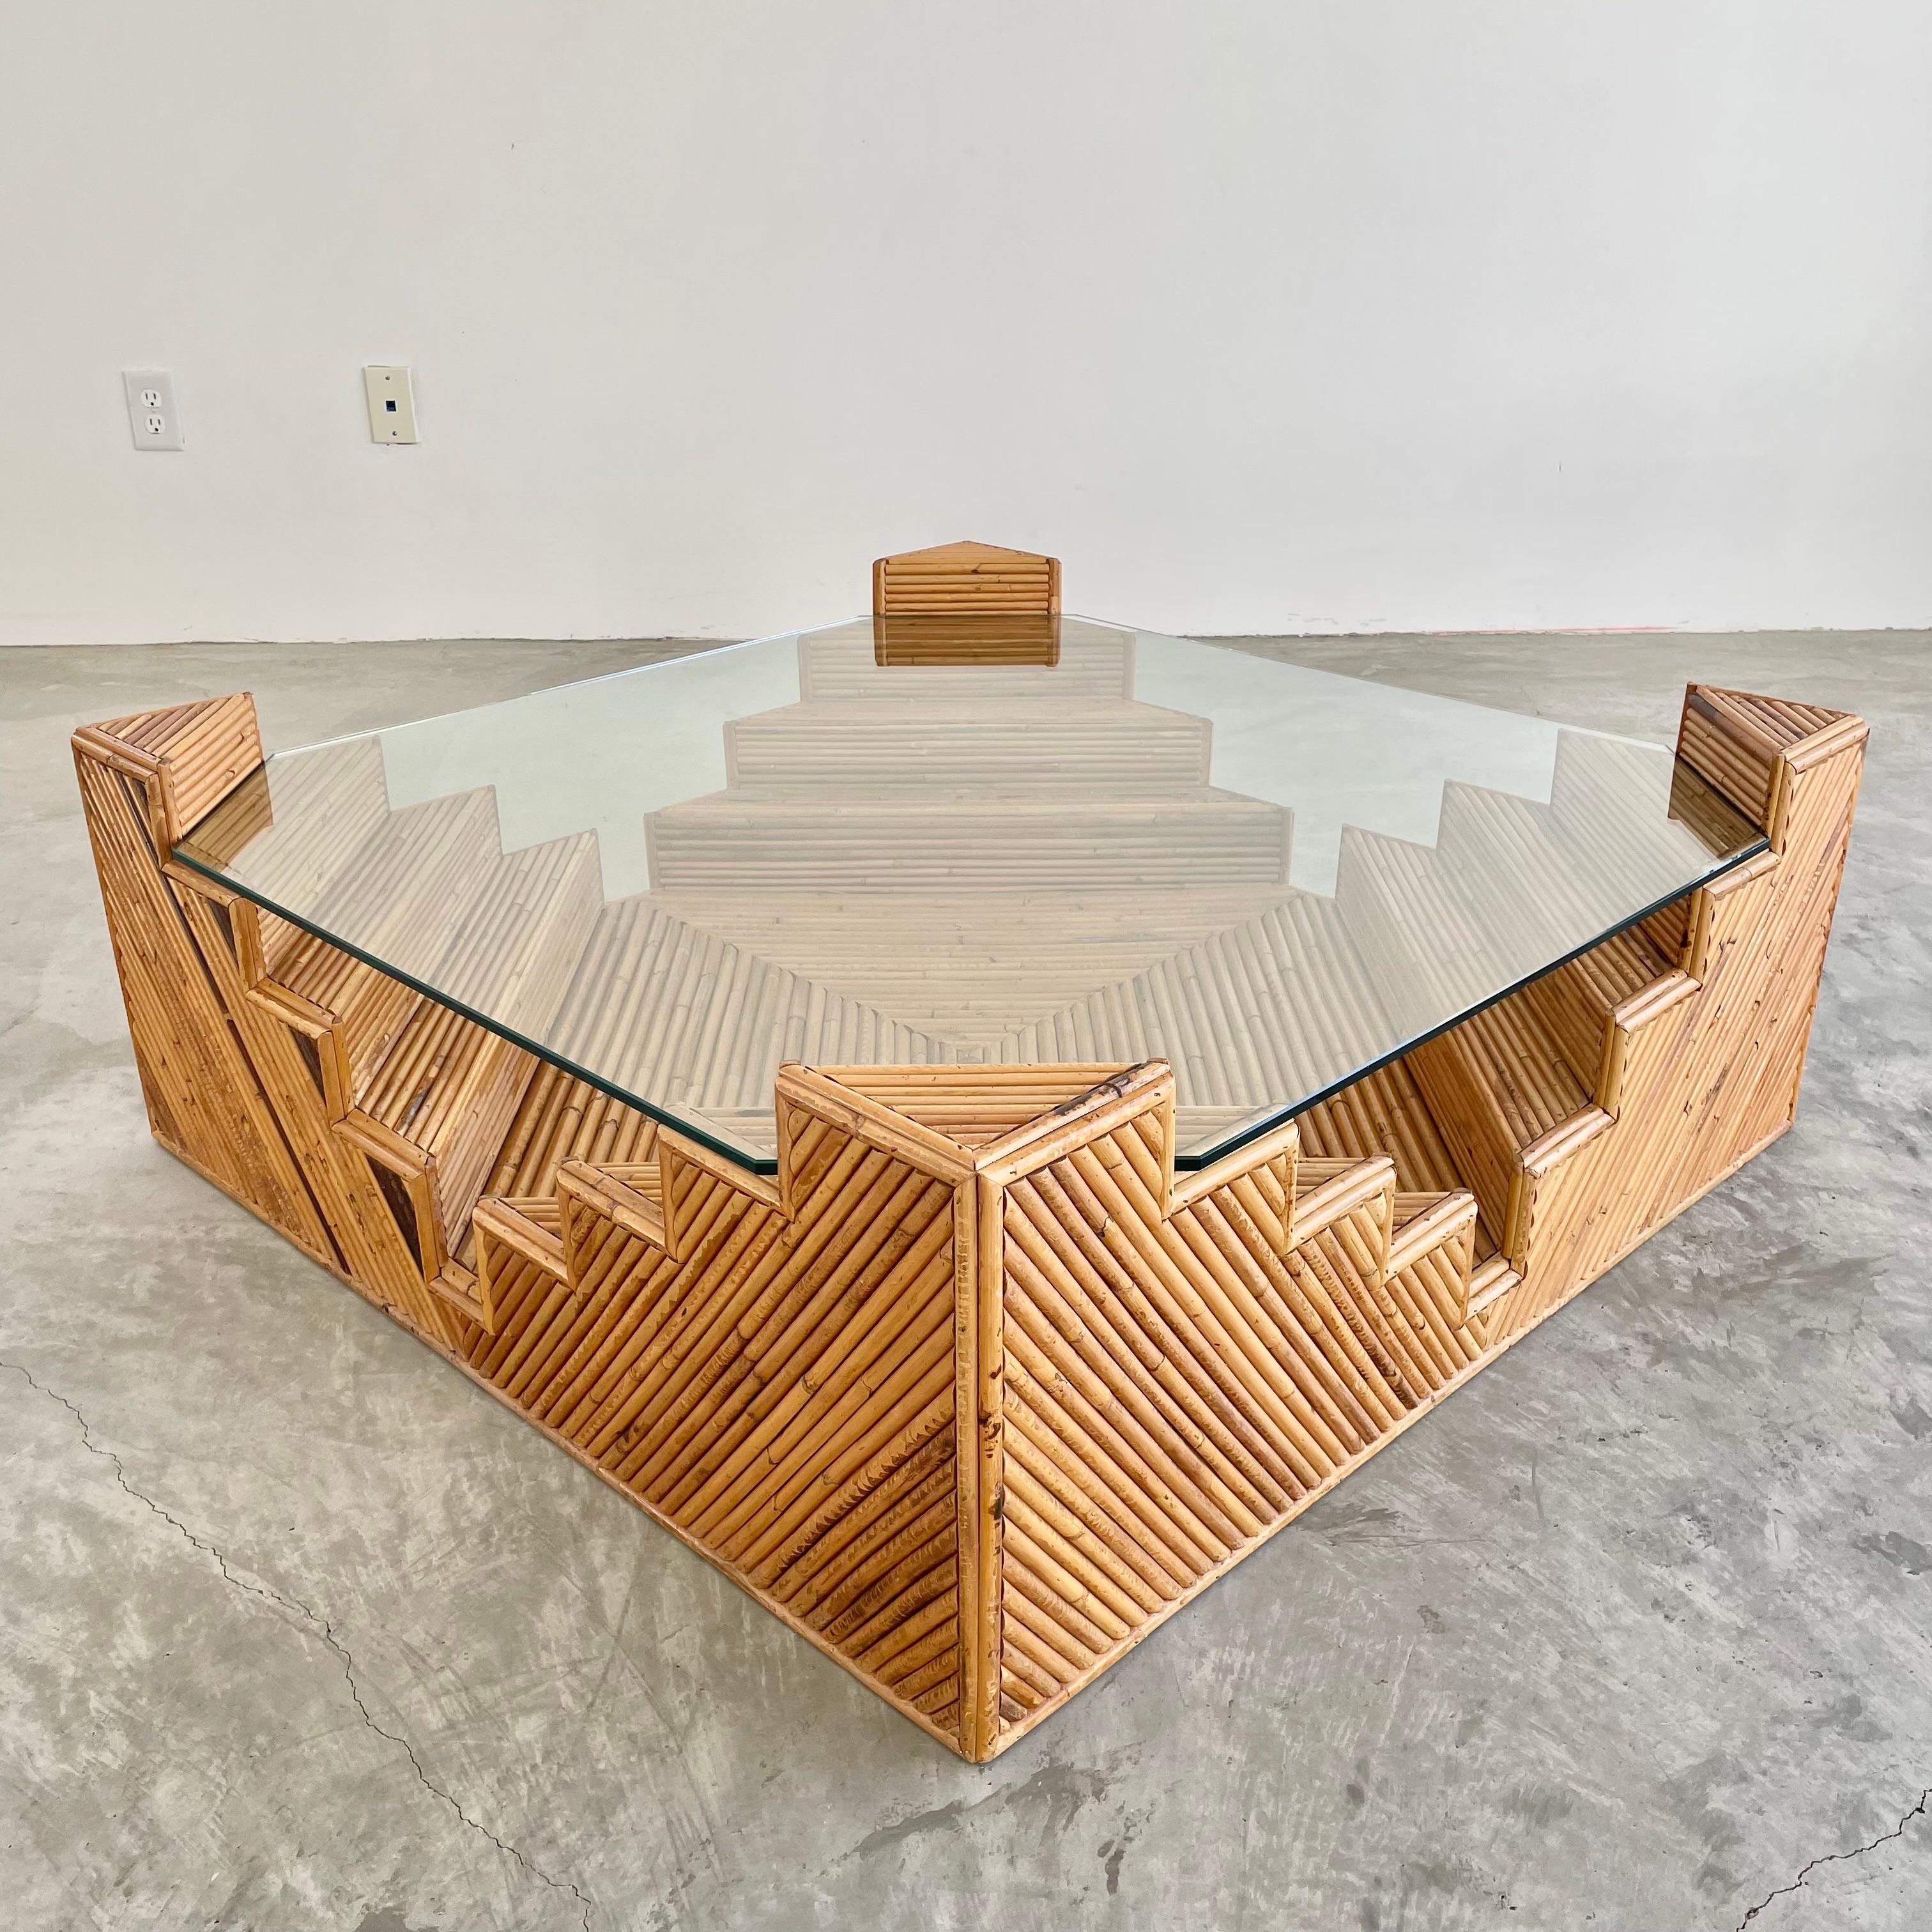 Late 20th Century Sculptural Bamboo Coffee Table, 1980s USA For Sale